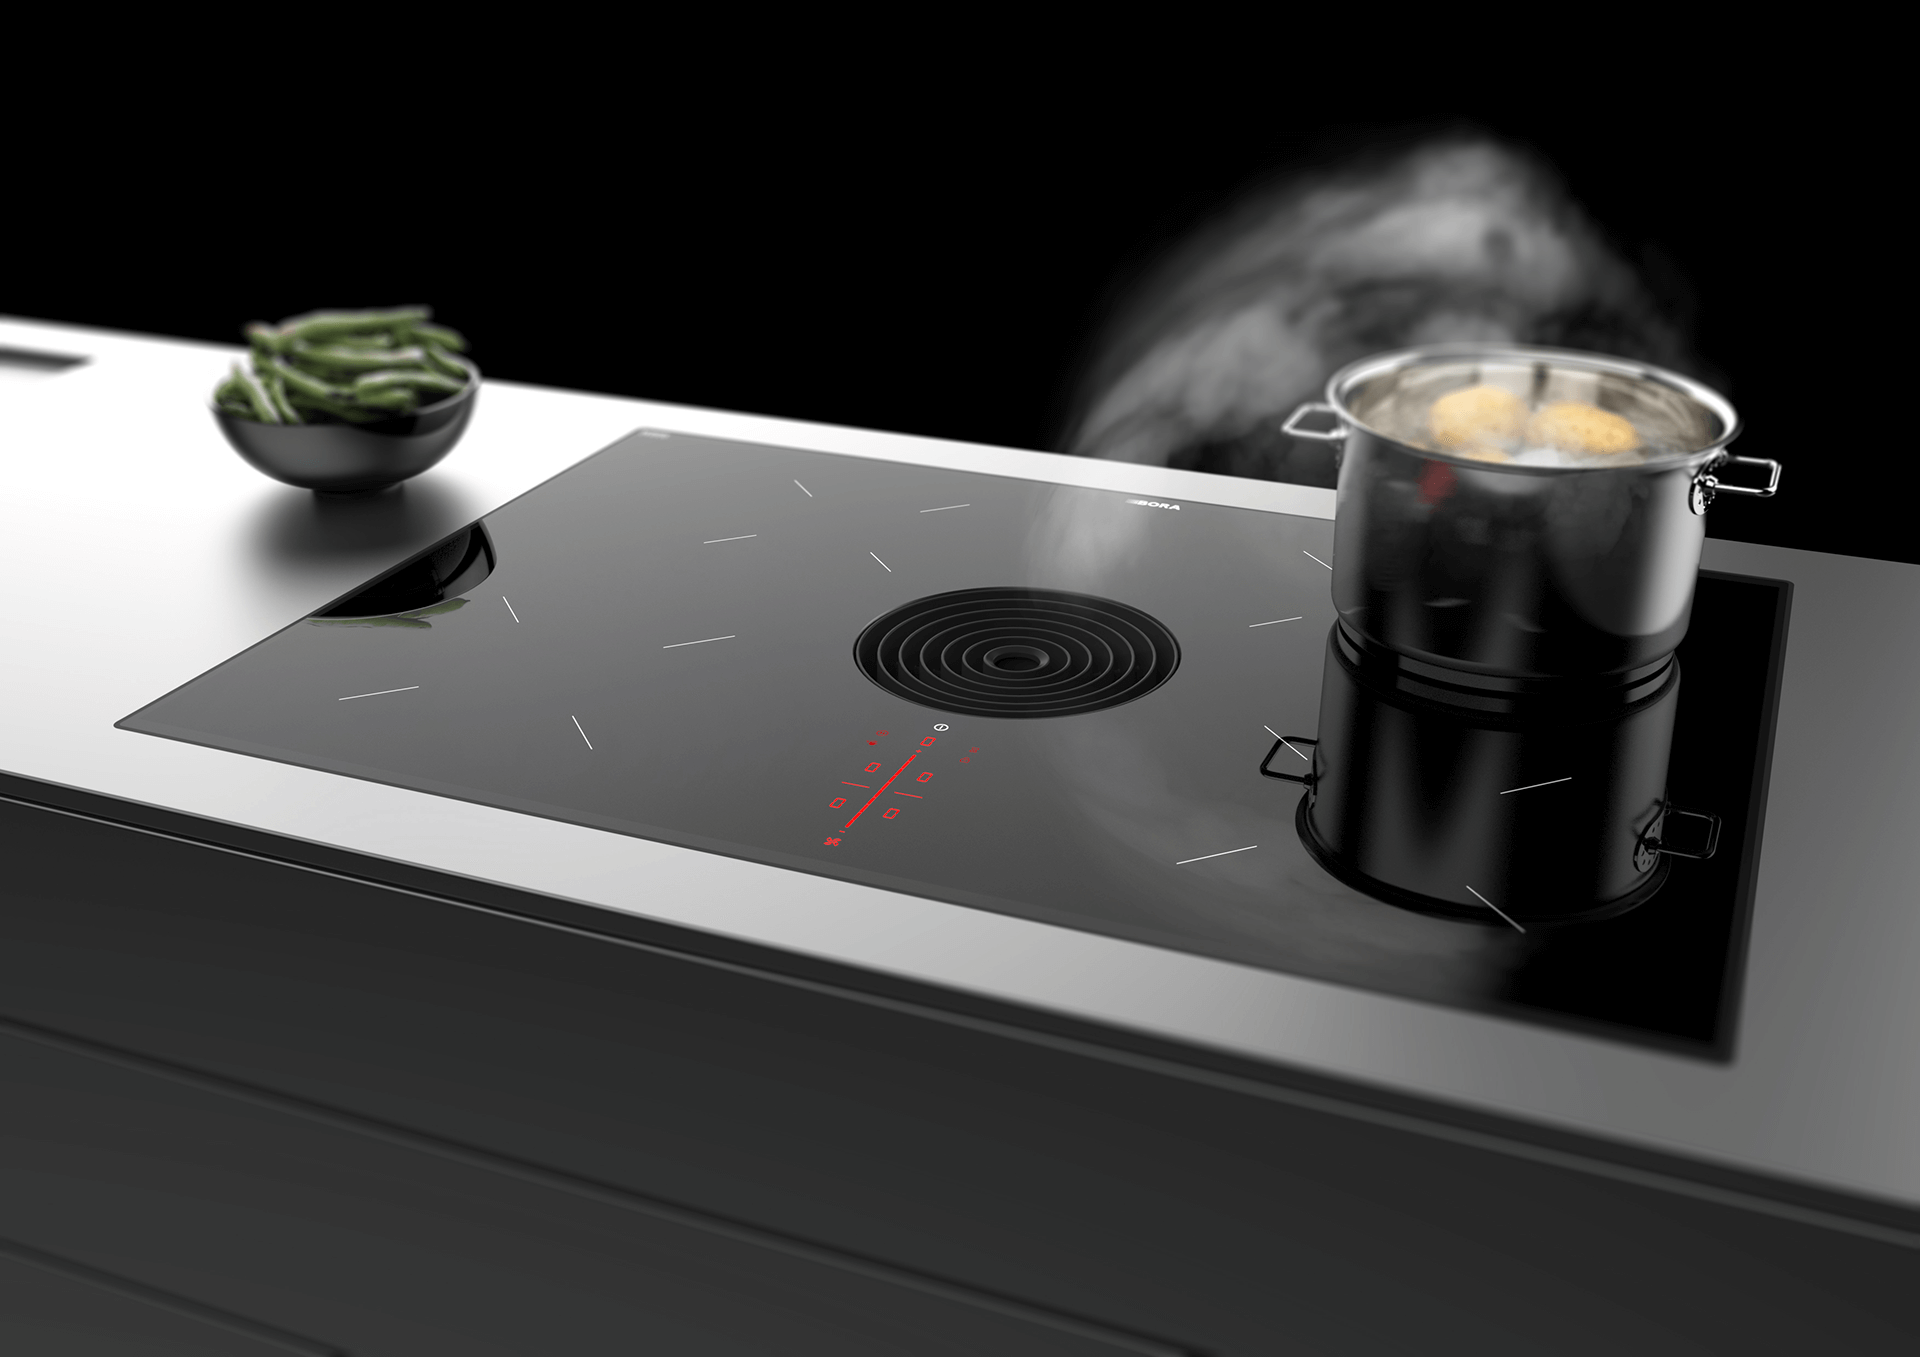 A BORA Pure with a black inlet nozzzle, which absorbs the steam from a boiling pan.